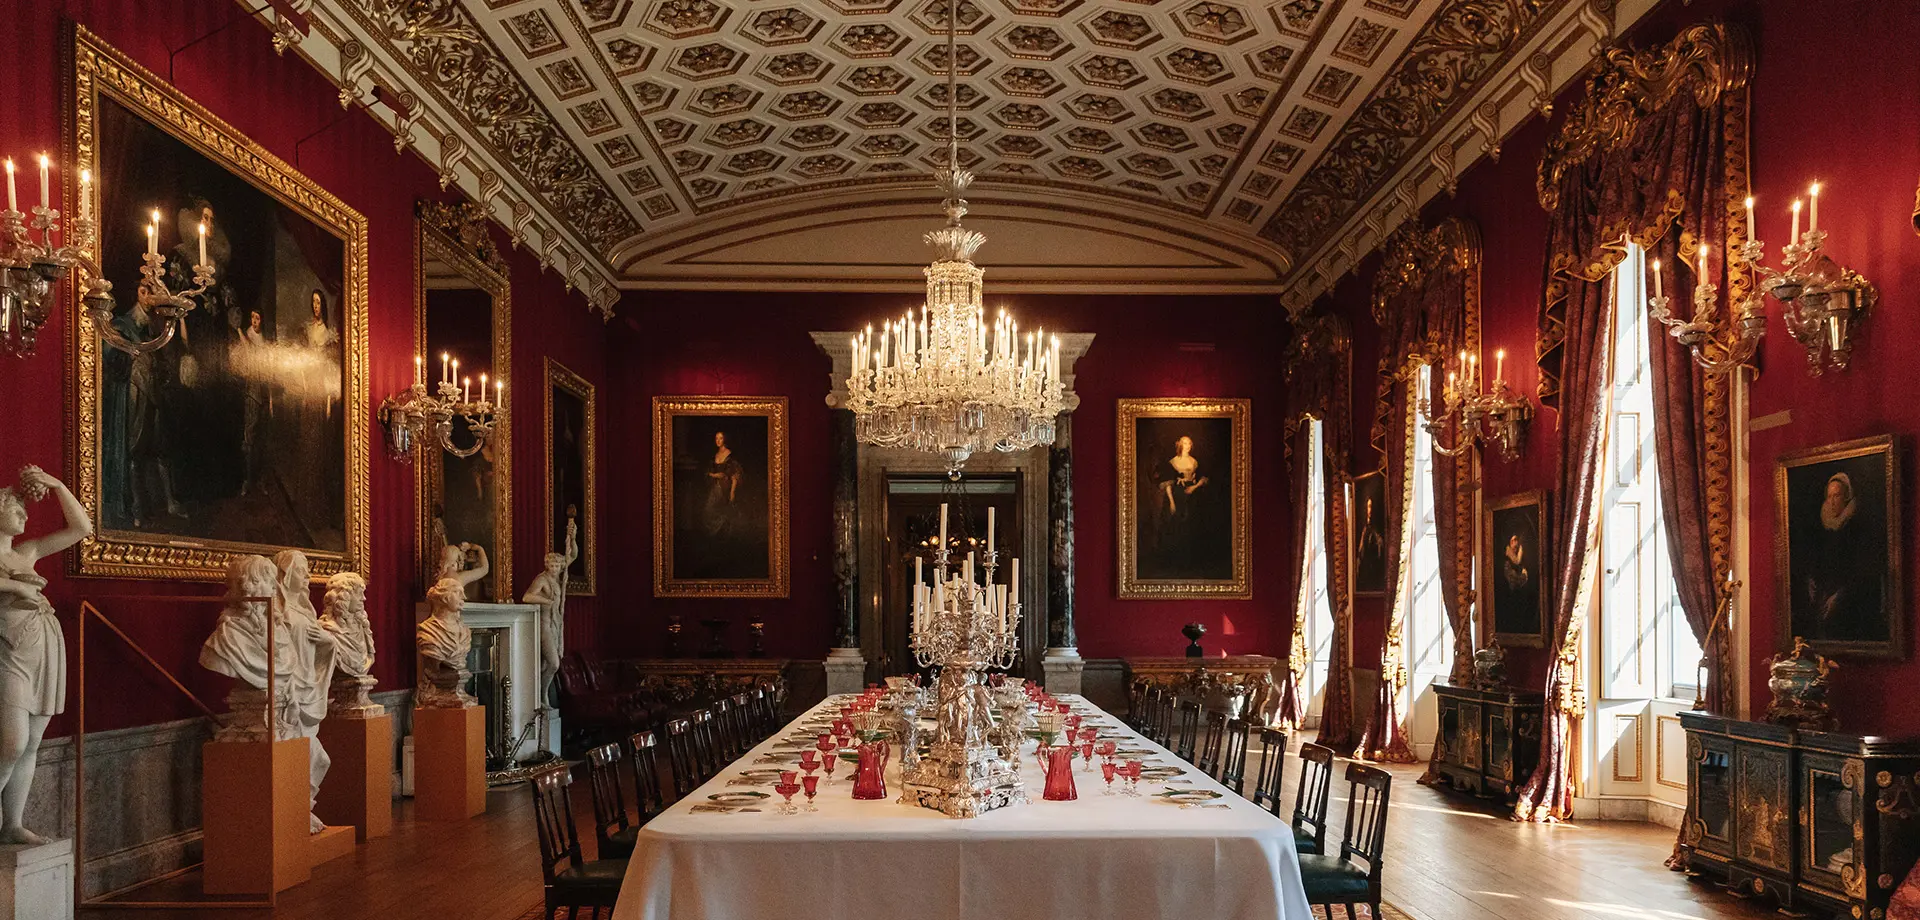 The Great Dining Room